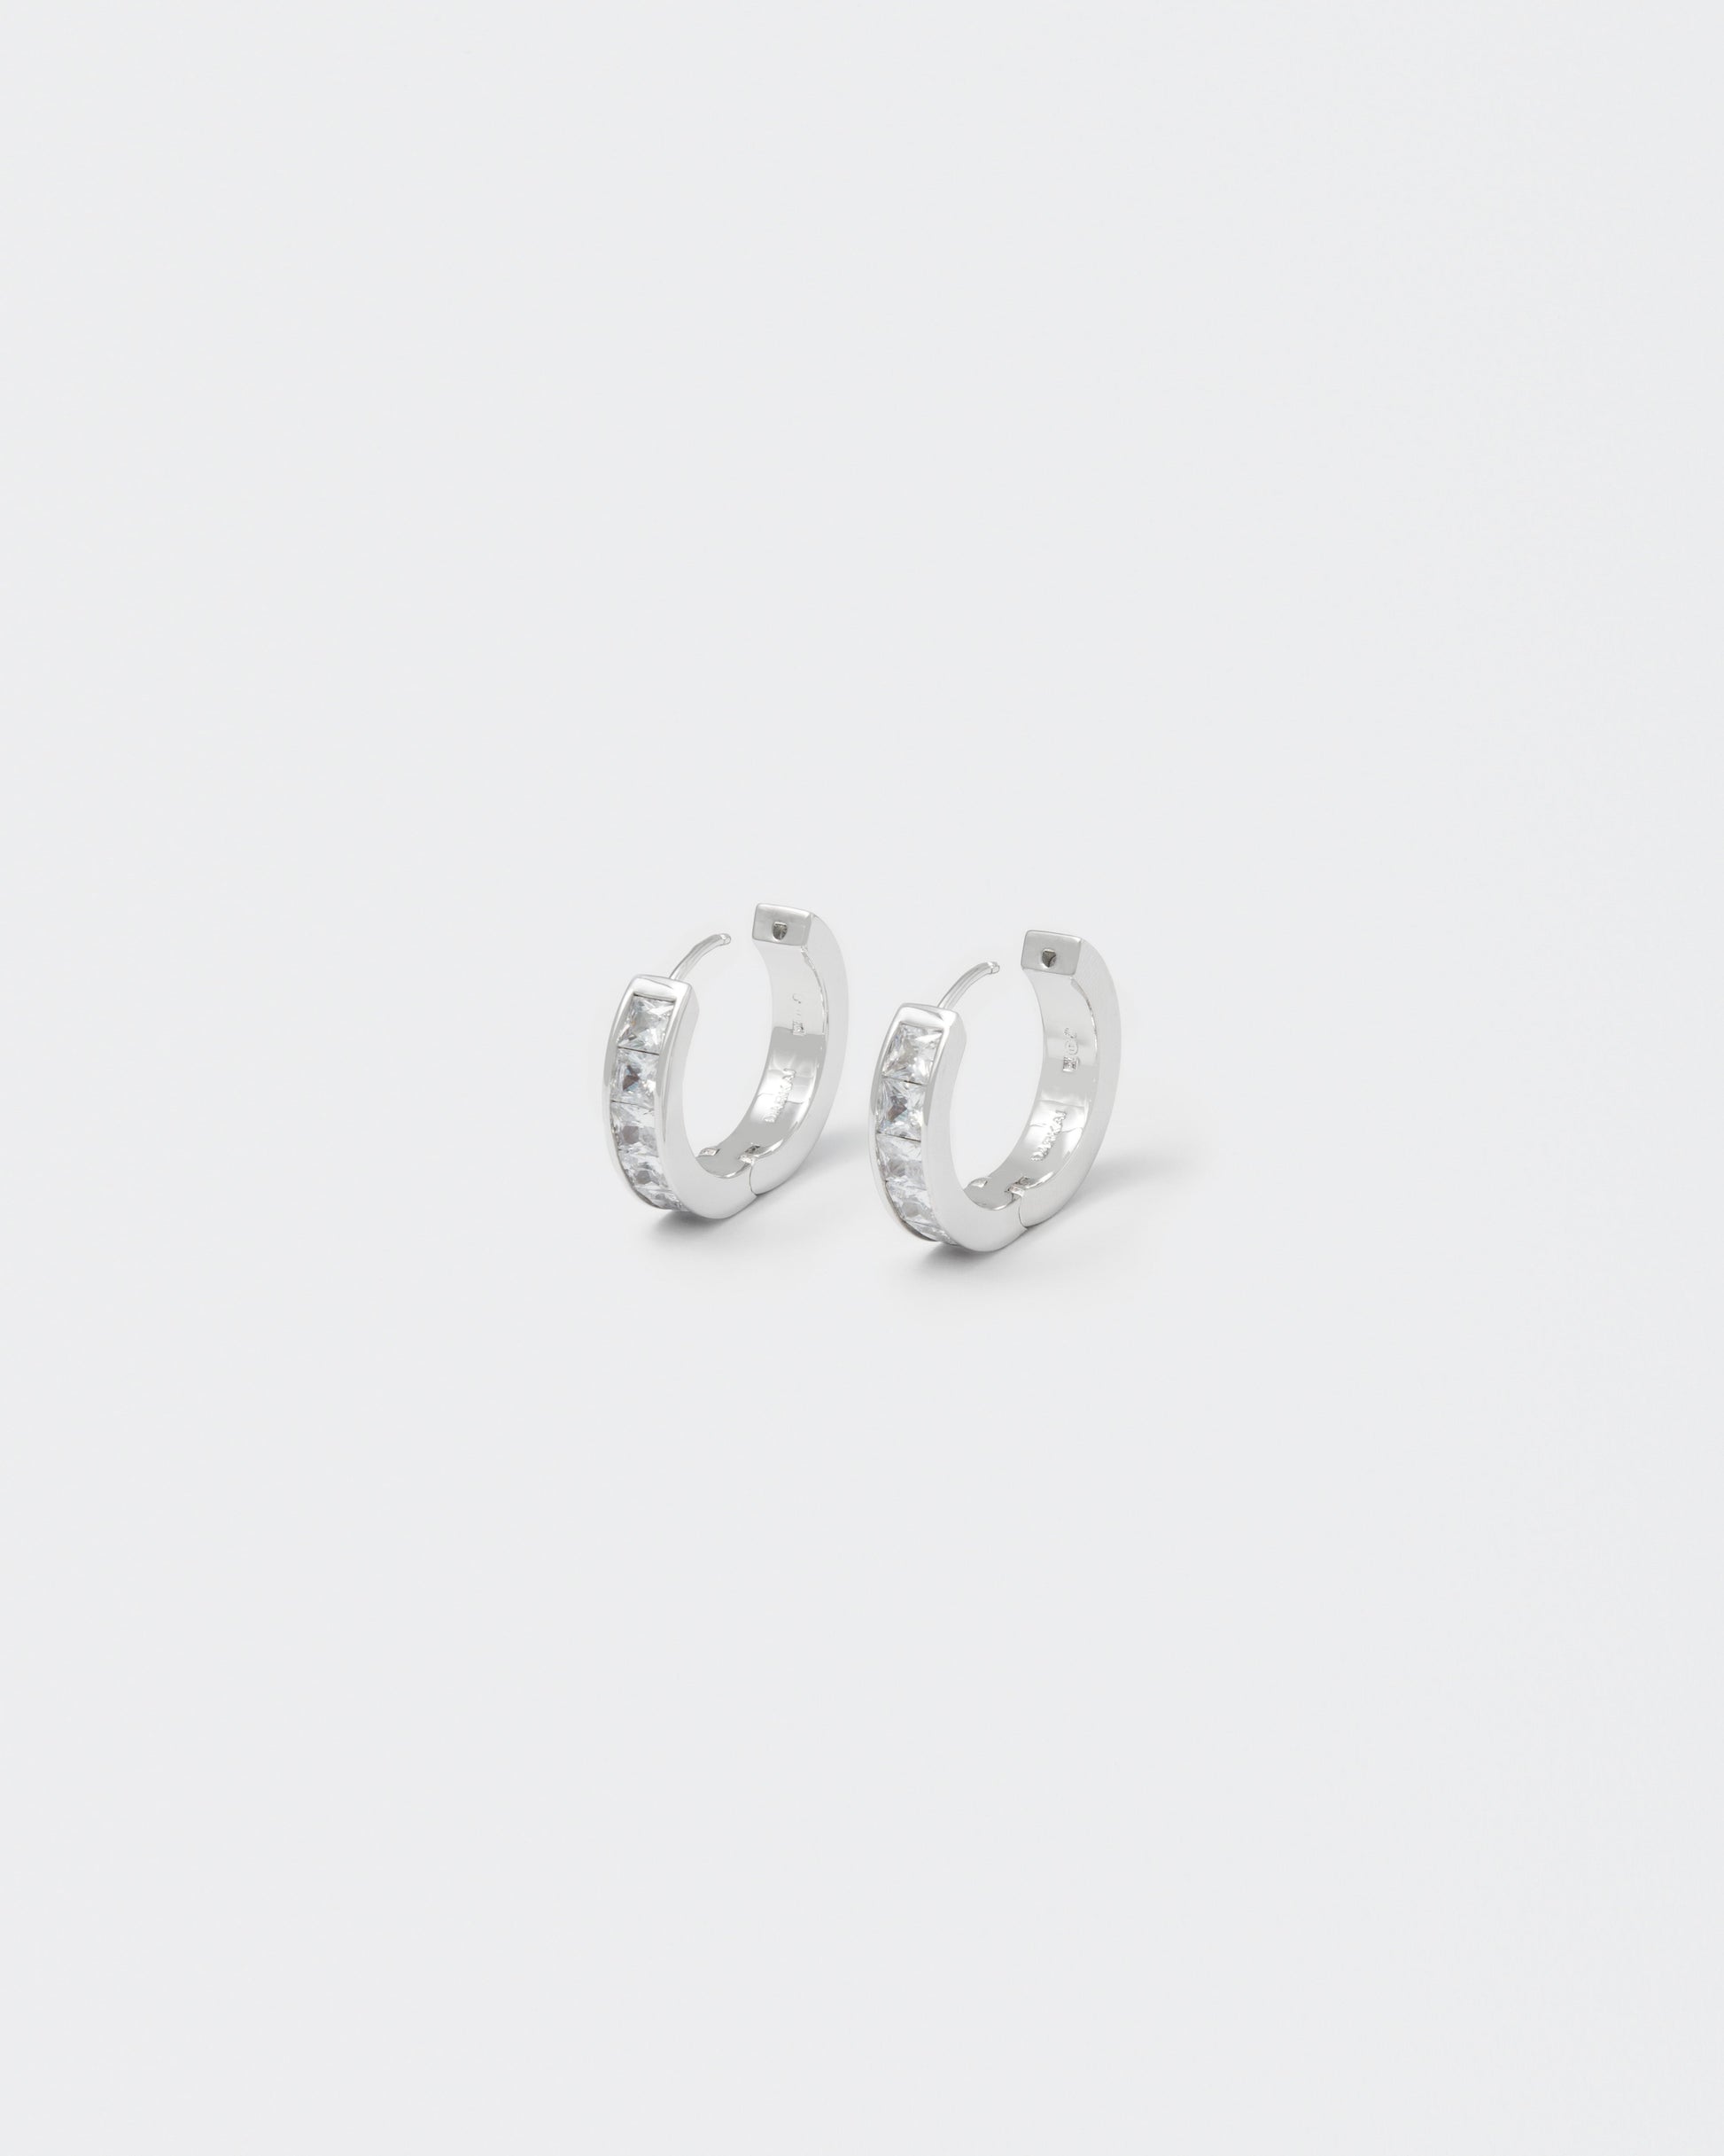 18k white gold coated tennis earrings with hand-set princess-cut stones in white